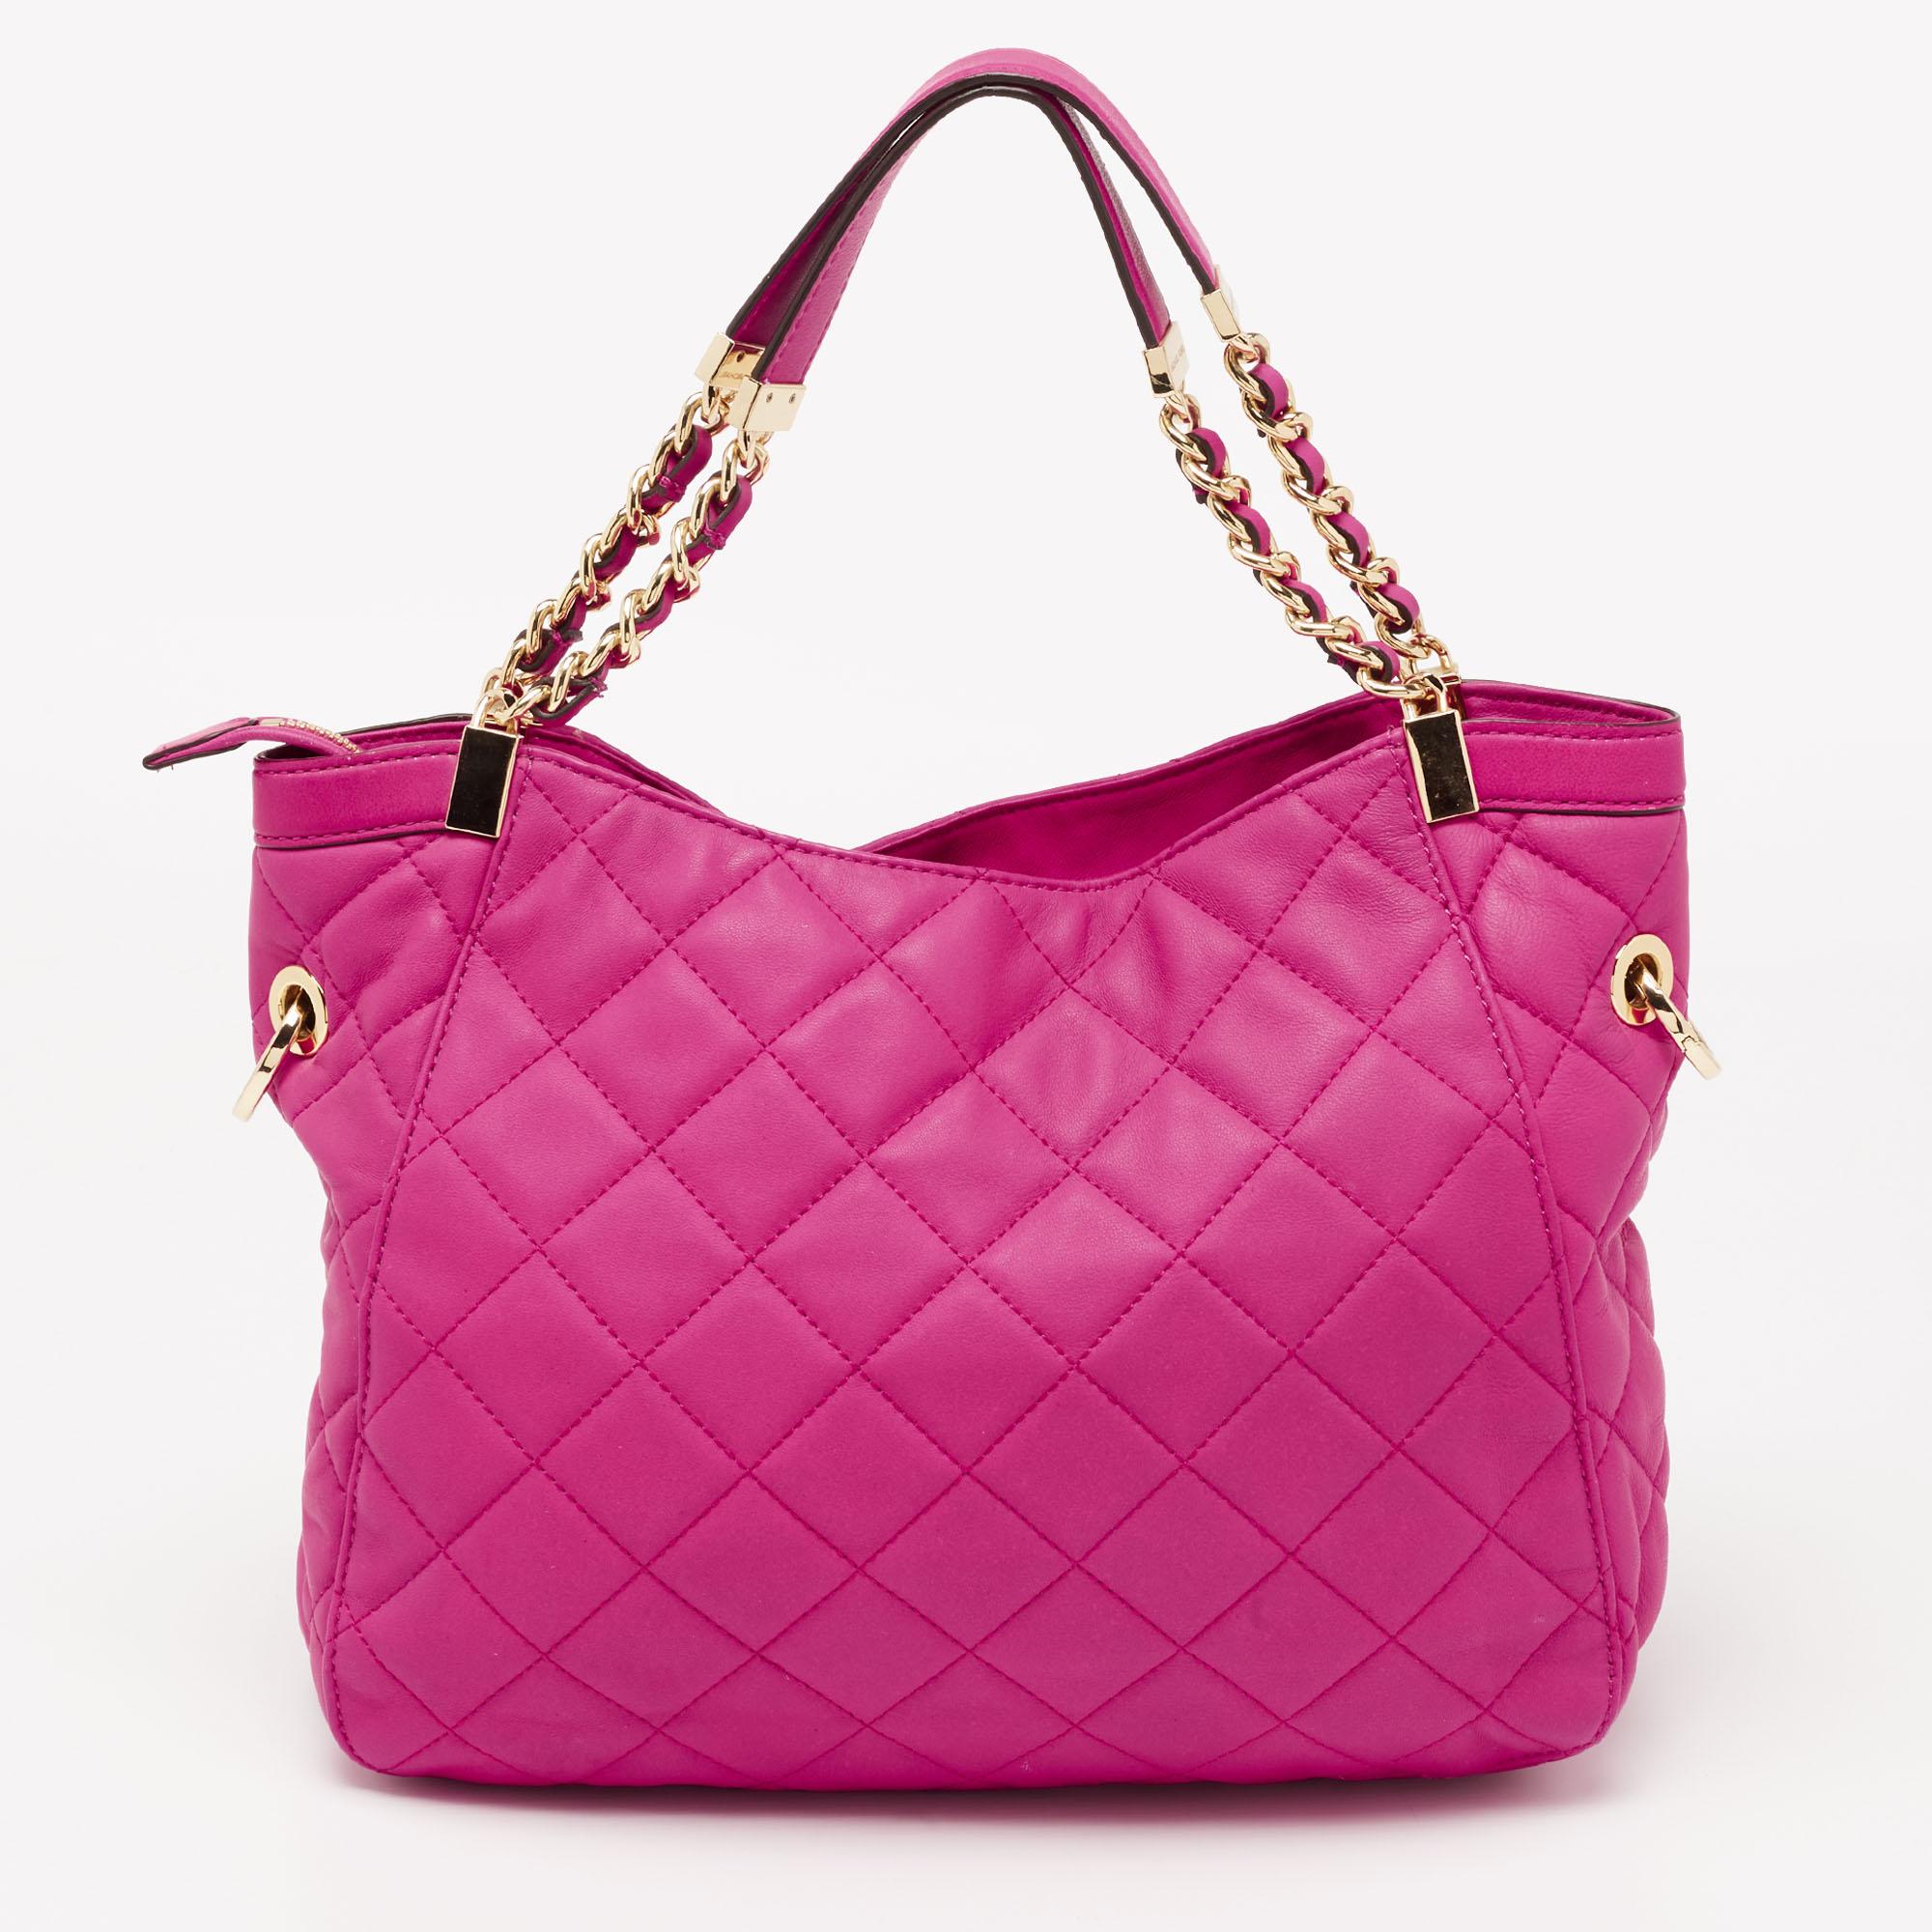 From the MICHAEL Michael Kors, this hobo is tailored to exude finesse and functionality. It features a malleable exterior made from quilted leather is adorned in a lovely neon pink hue and a spacious interior. Add some extra style to your everyday